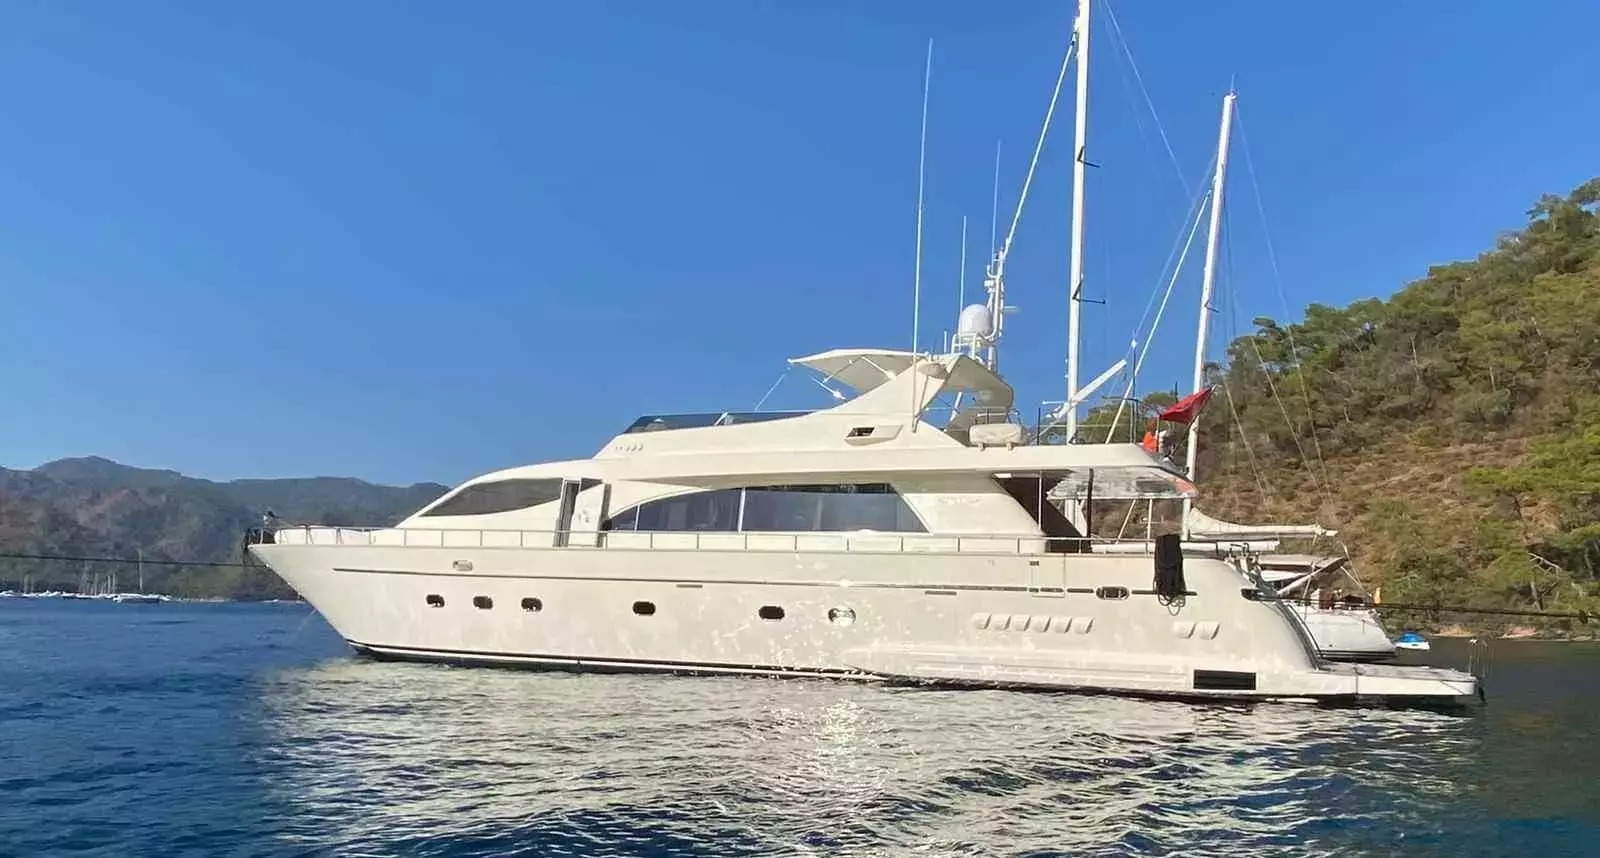 Boram by Falcon - Top rates for a Charter of a private Motor Yacht in Greece